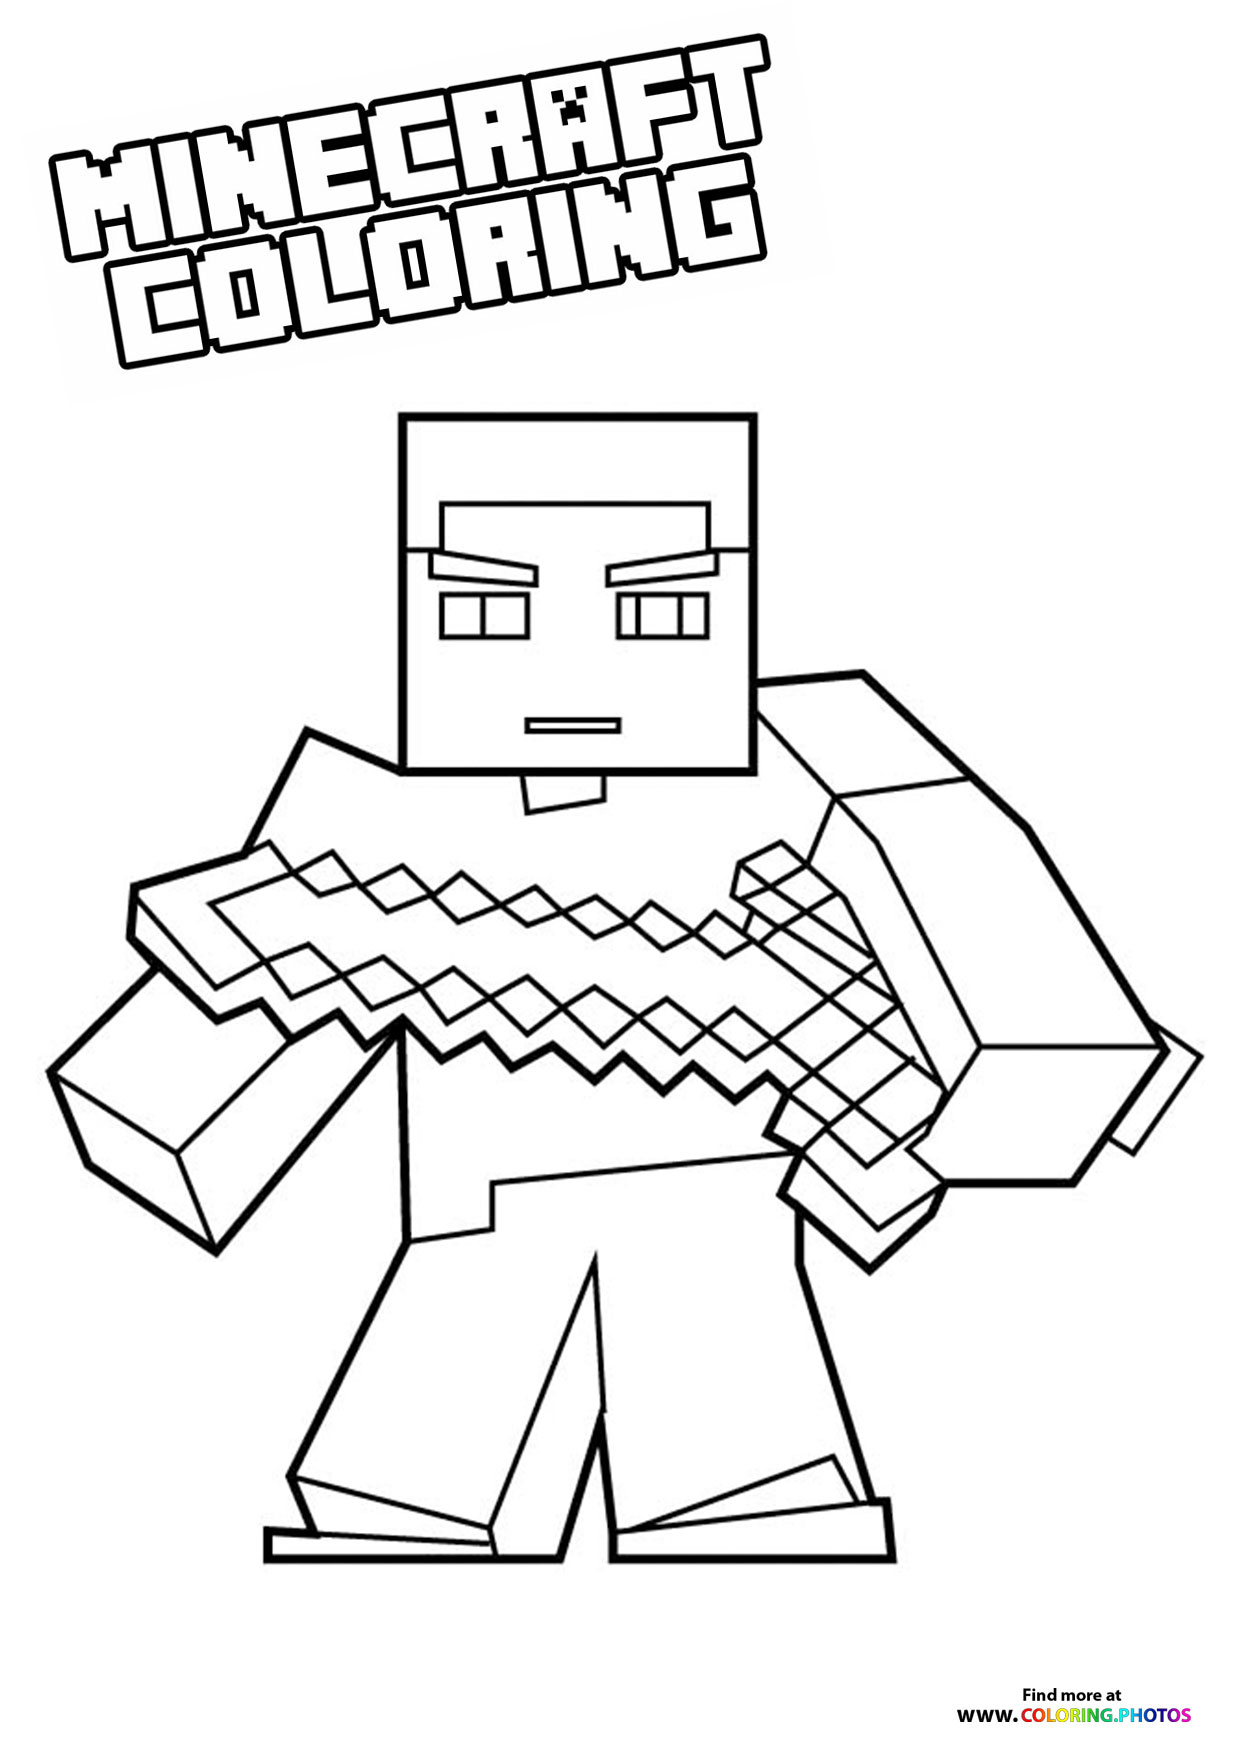 Minecraft Steve with a sword looking good - Coloring Pages for kids